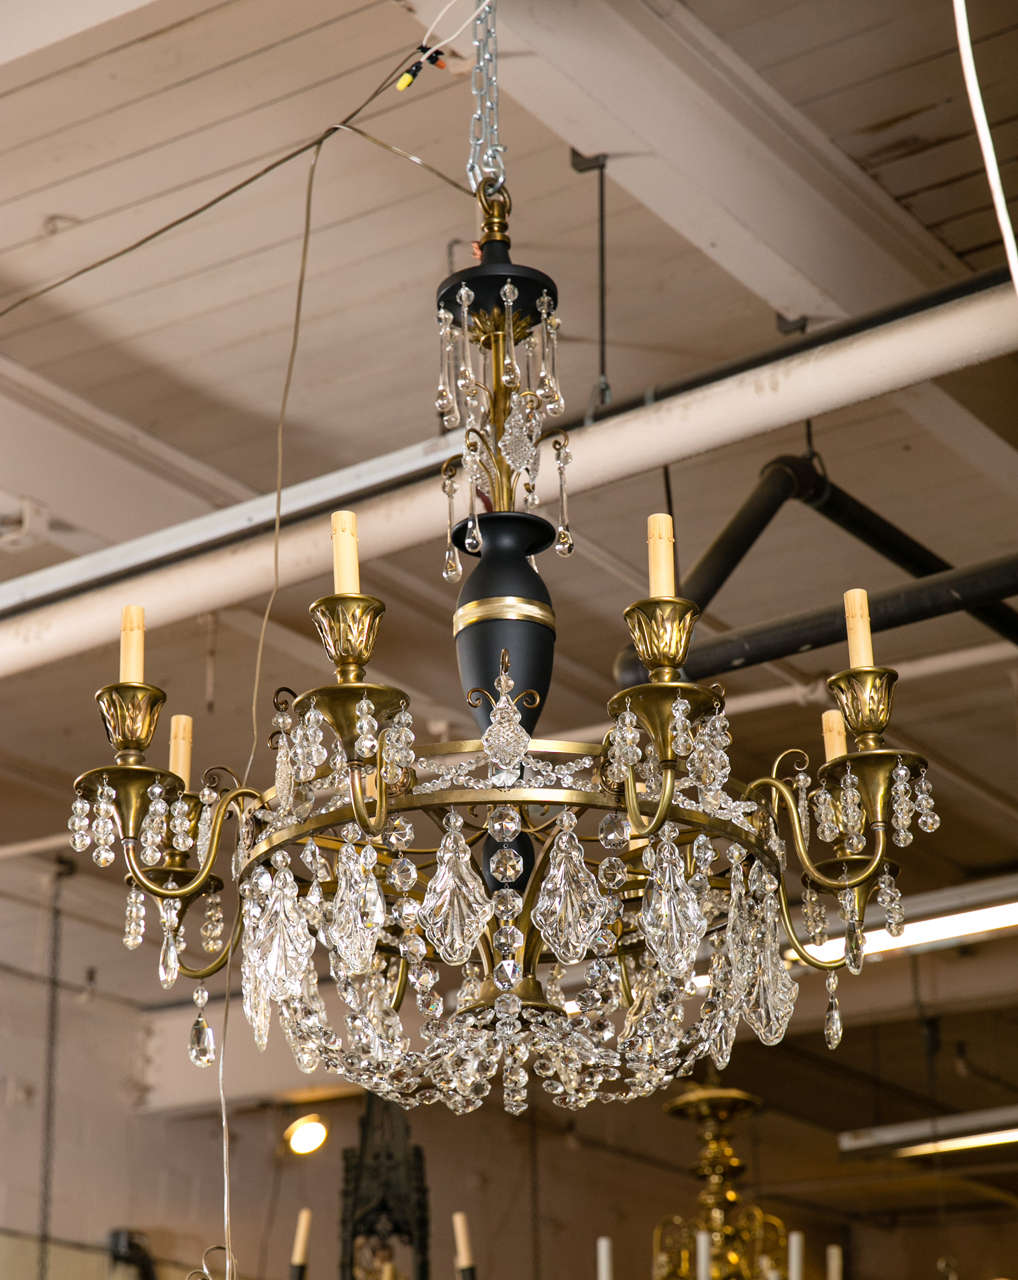 This is a gorgeous example of empire lighting.  This chandelier showcases exquisite details in elegant empire style.  There are 16 skirted bauble necklace strains and 8 arms with brass bobeches.  This chandelier is decorated with sparkling crystal